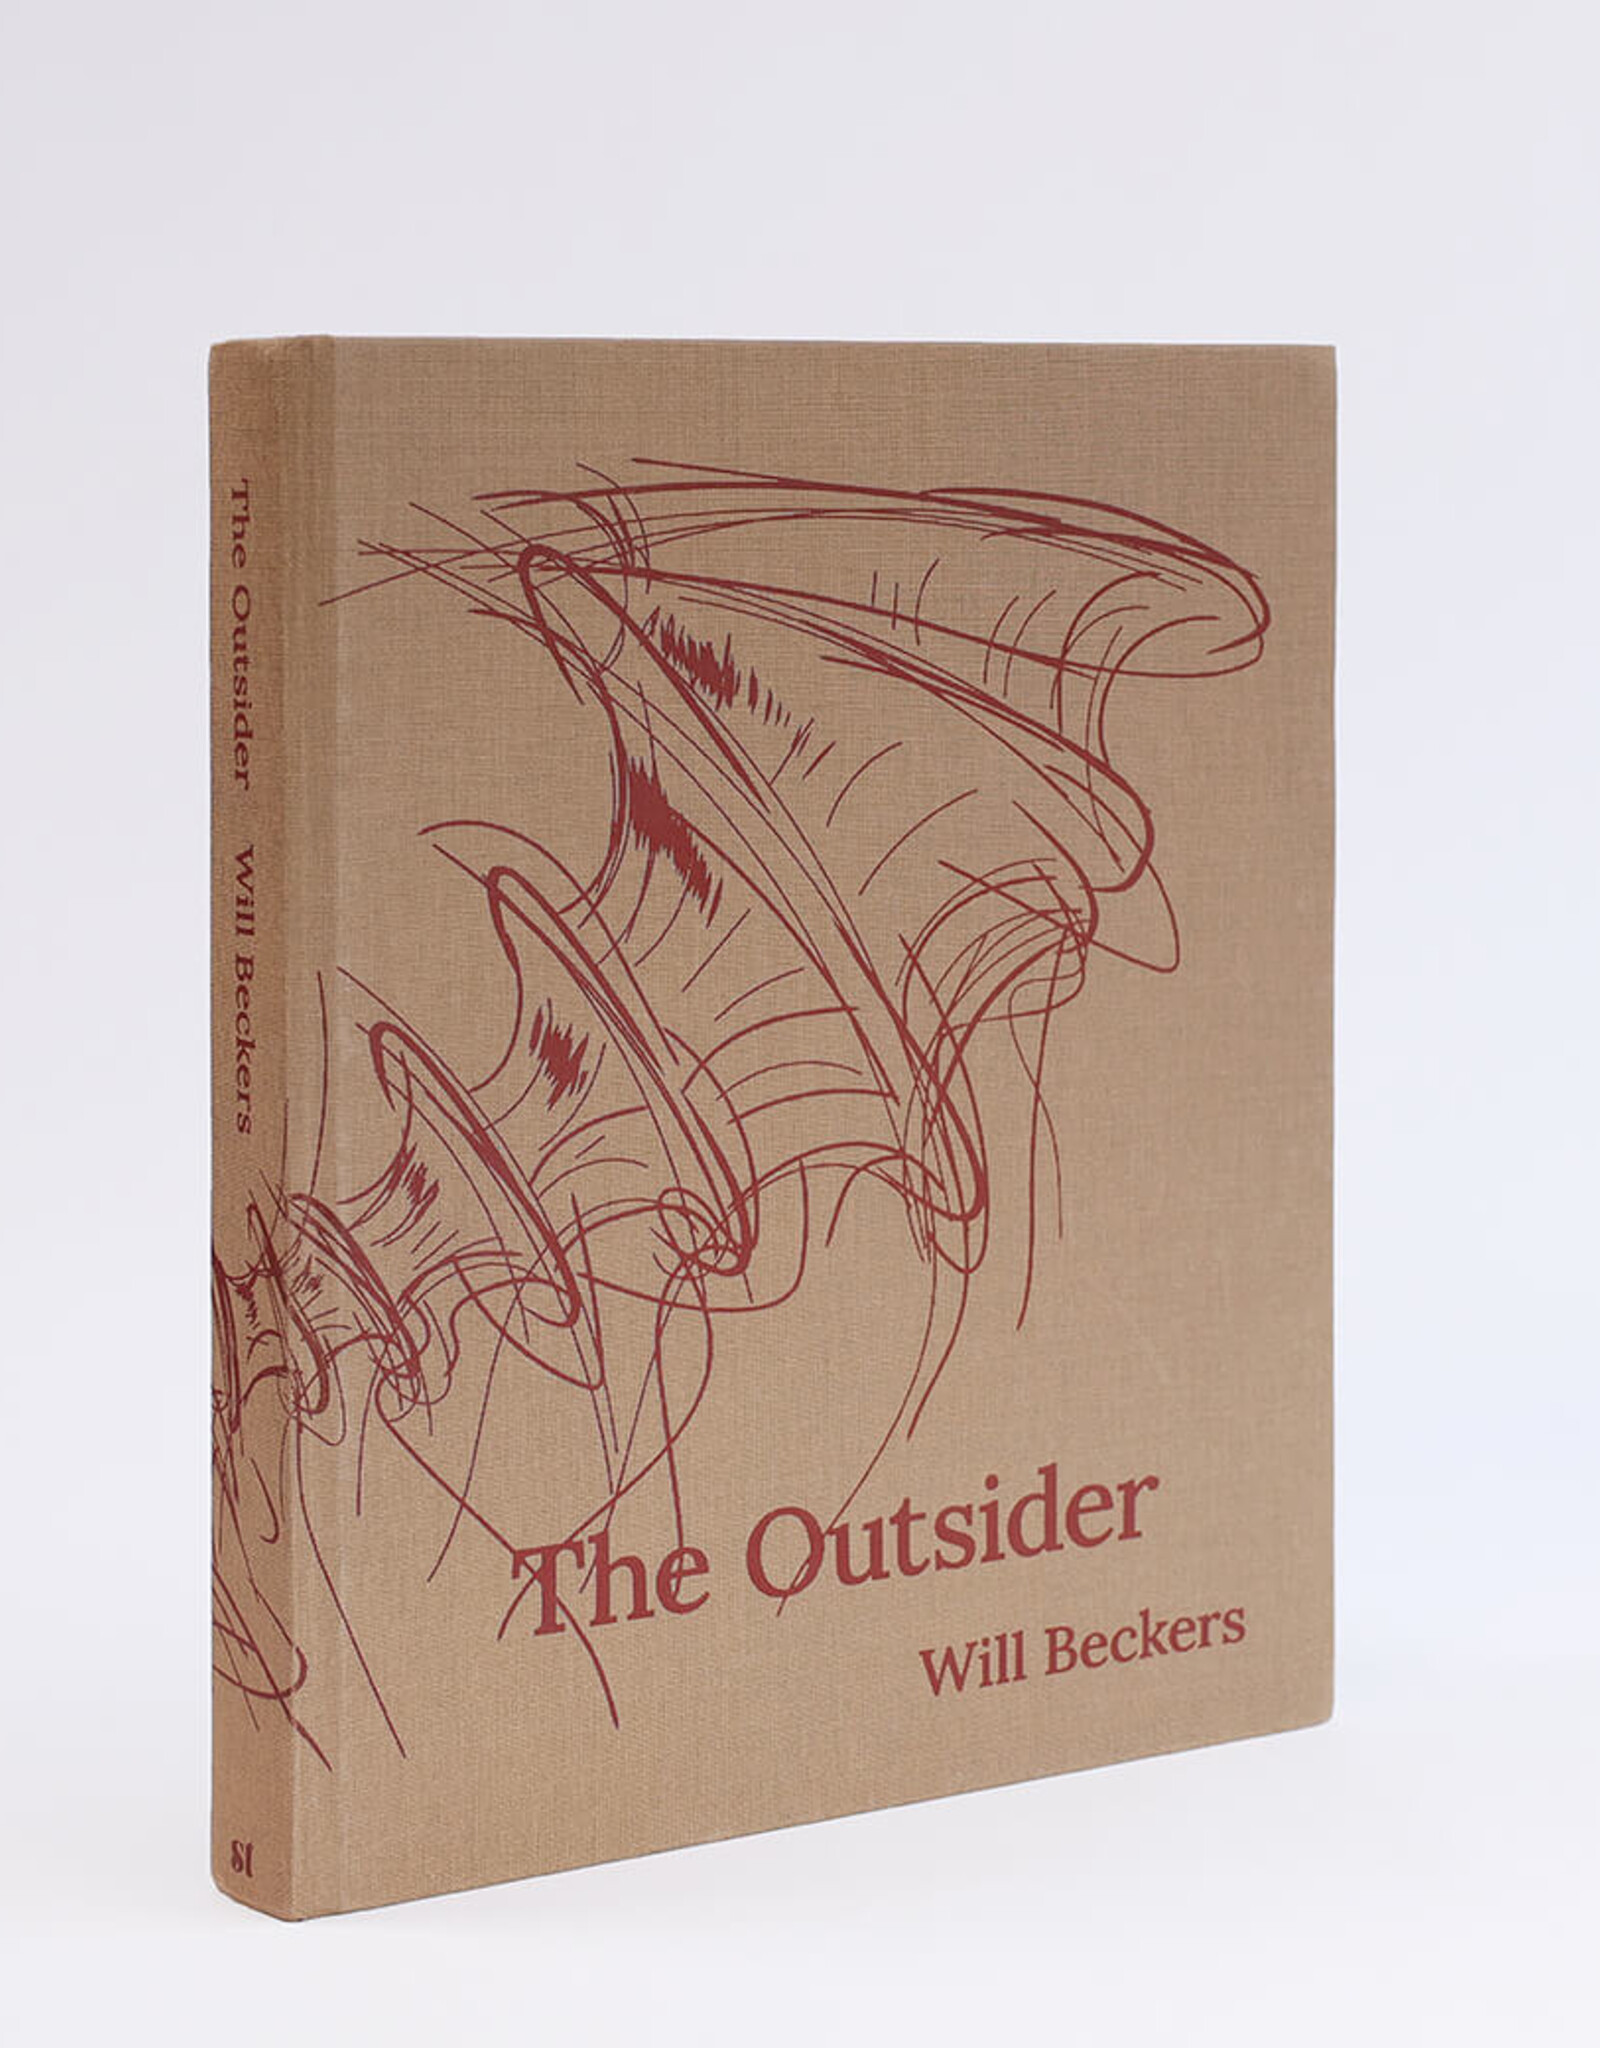 Will Beckers - The Outsider